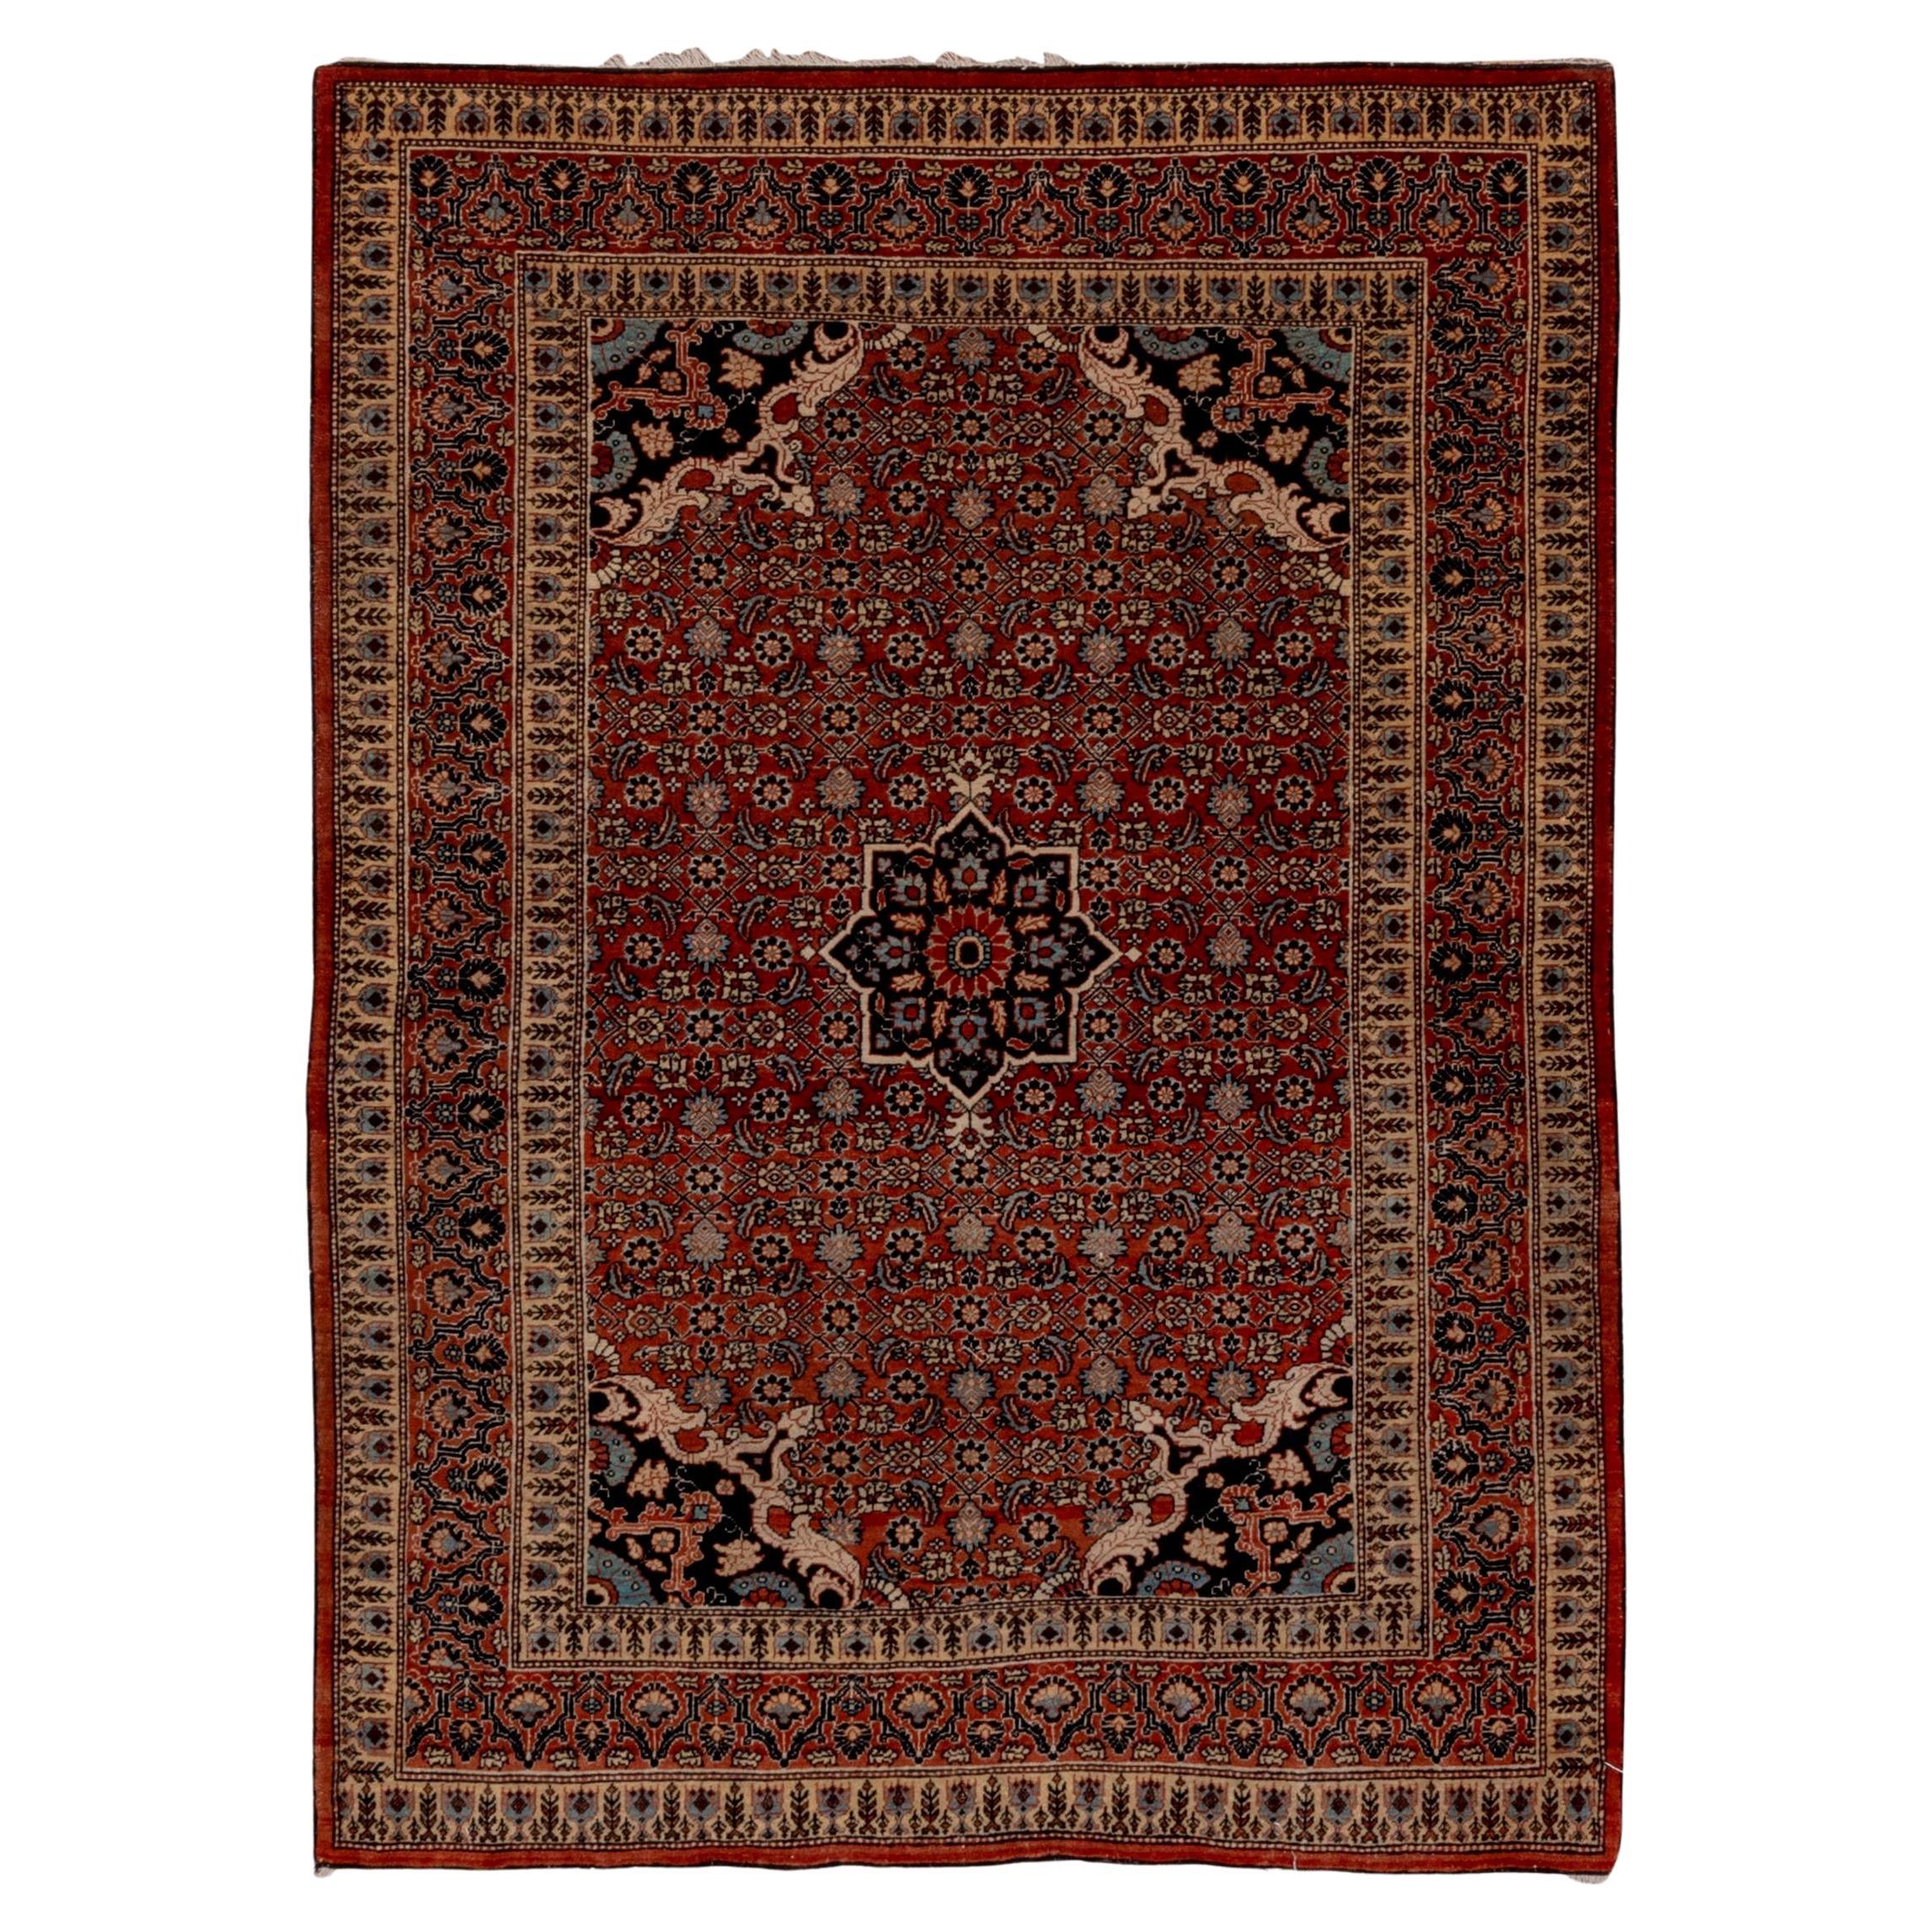 Finely Woven Antique Persian Tabriz Rug, Rust and Red Field, circa 1900s